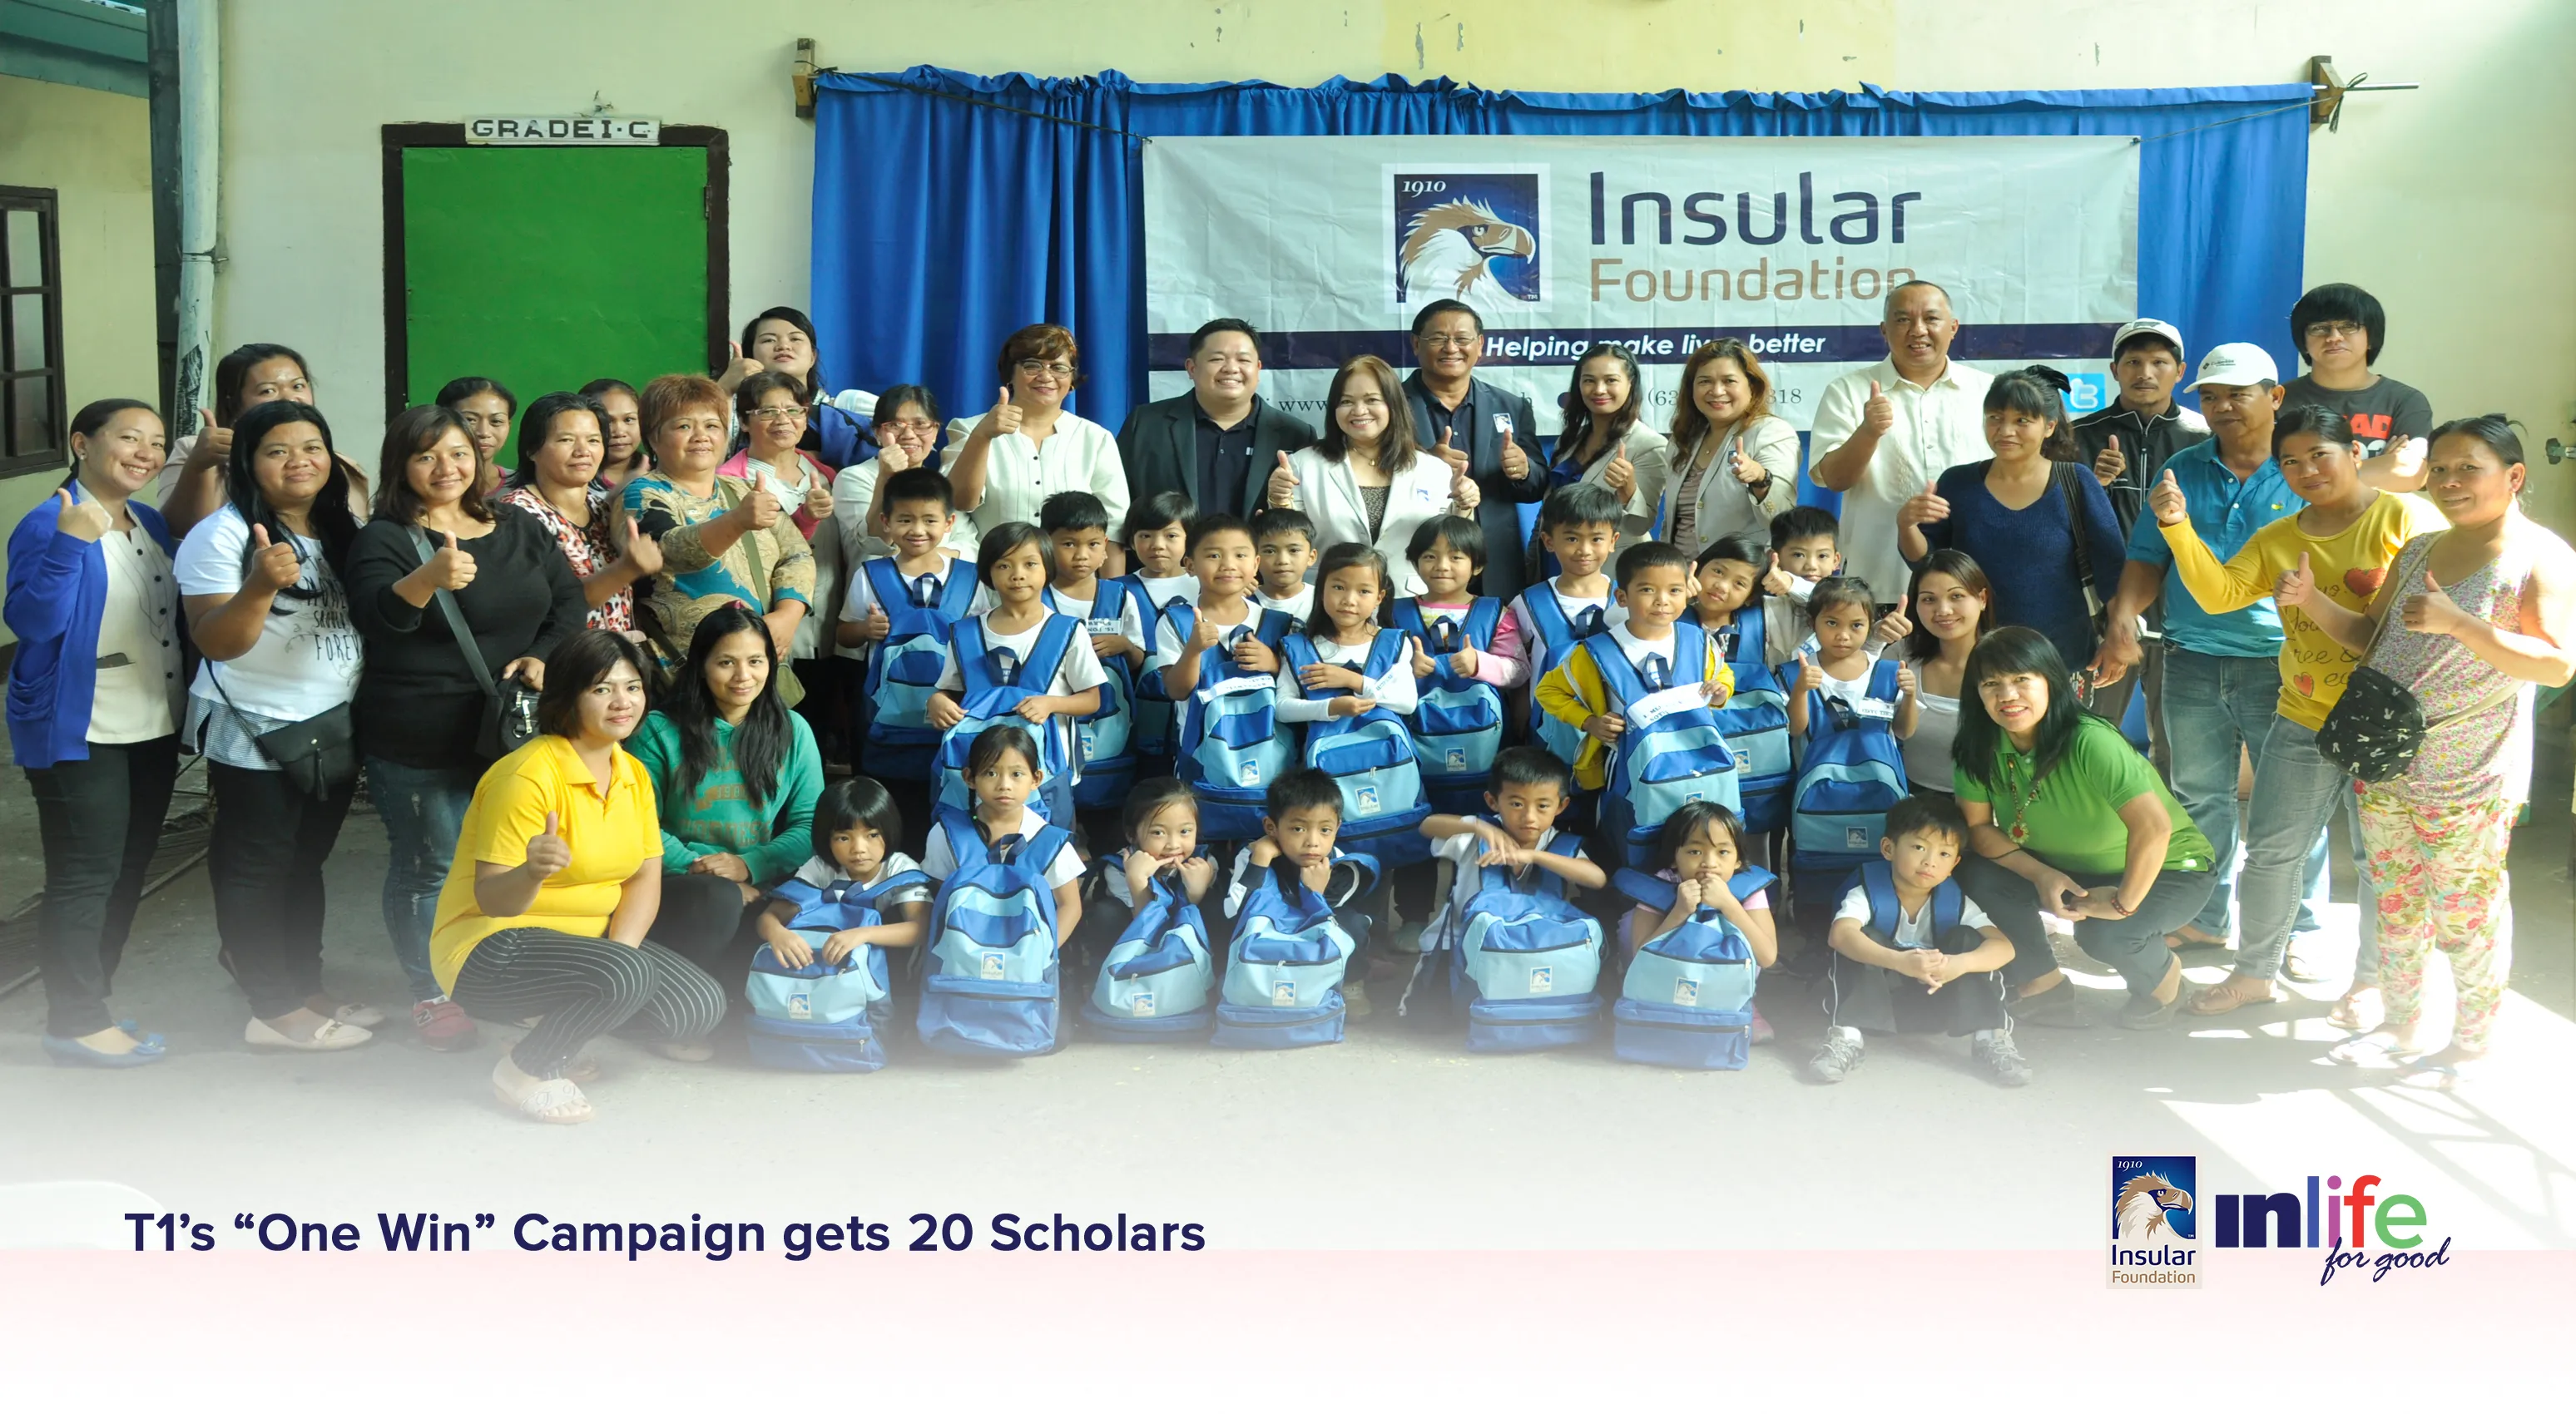 t1-s-one-win-campaign-gets-20-scholars